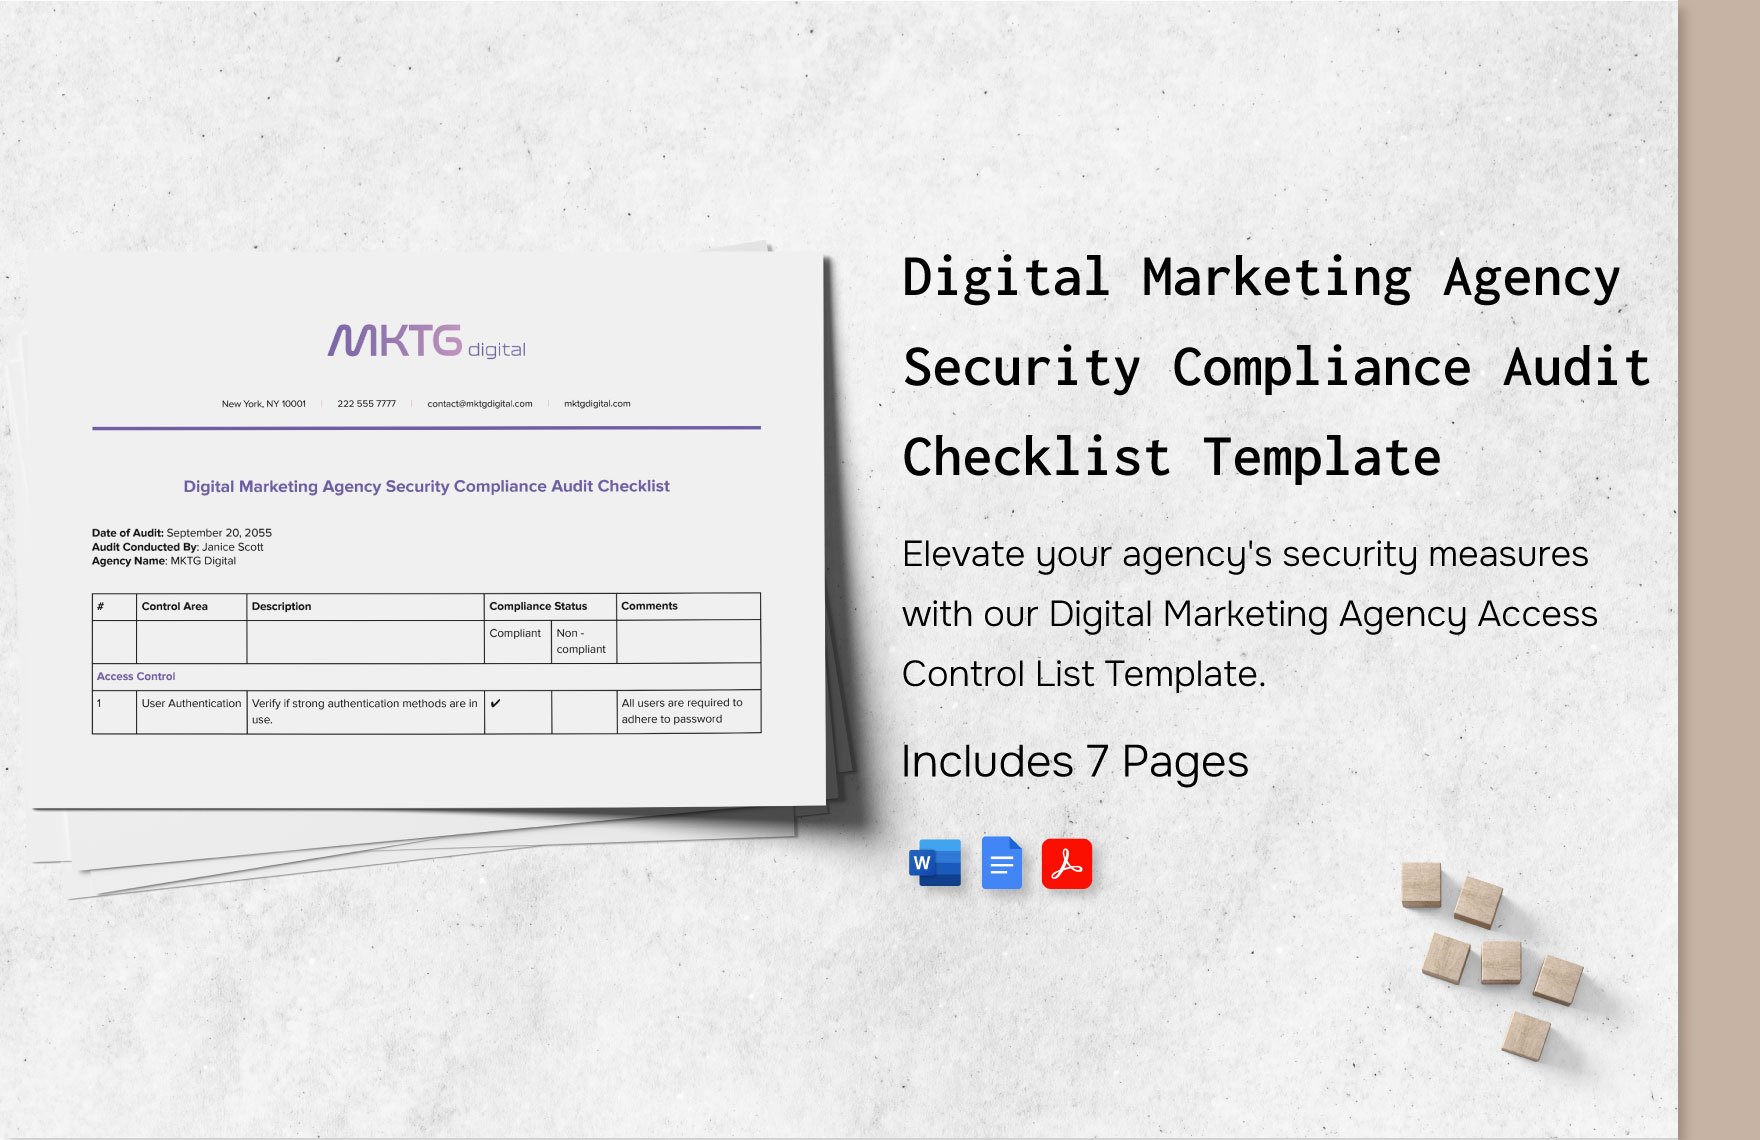 Digital Marketing Agency Security Compliance Audit Checklist Template